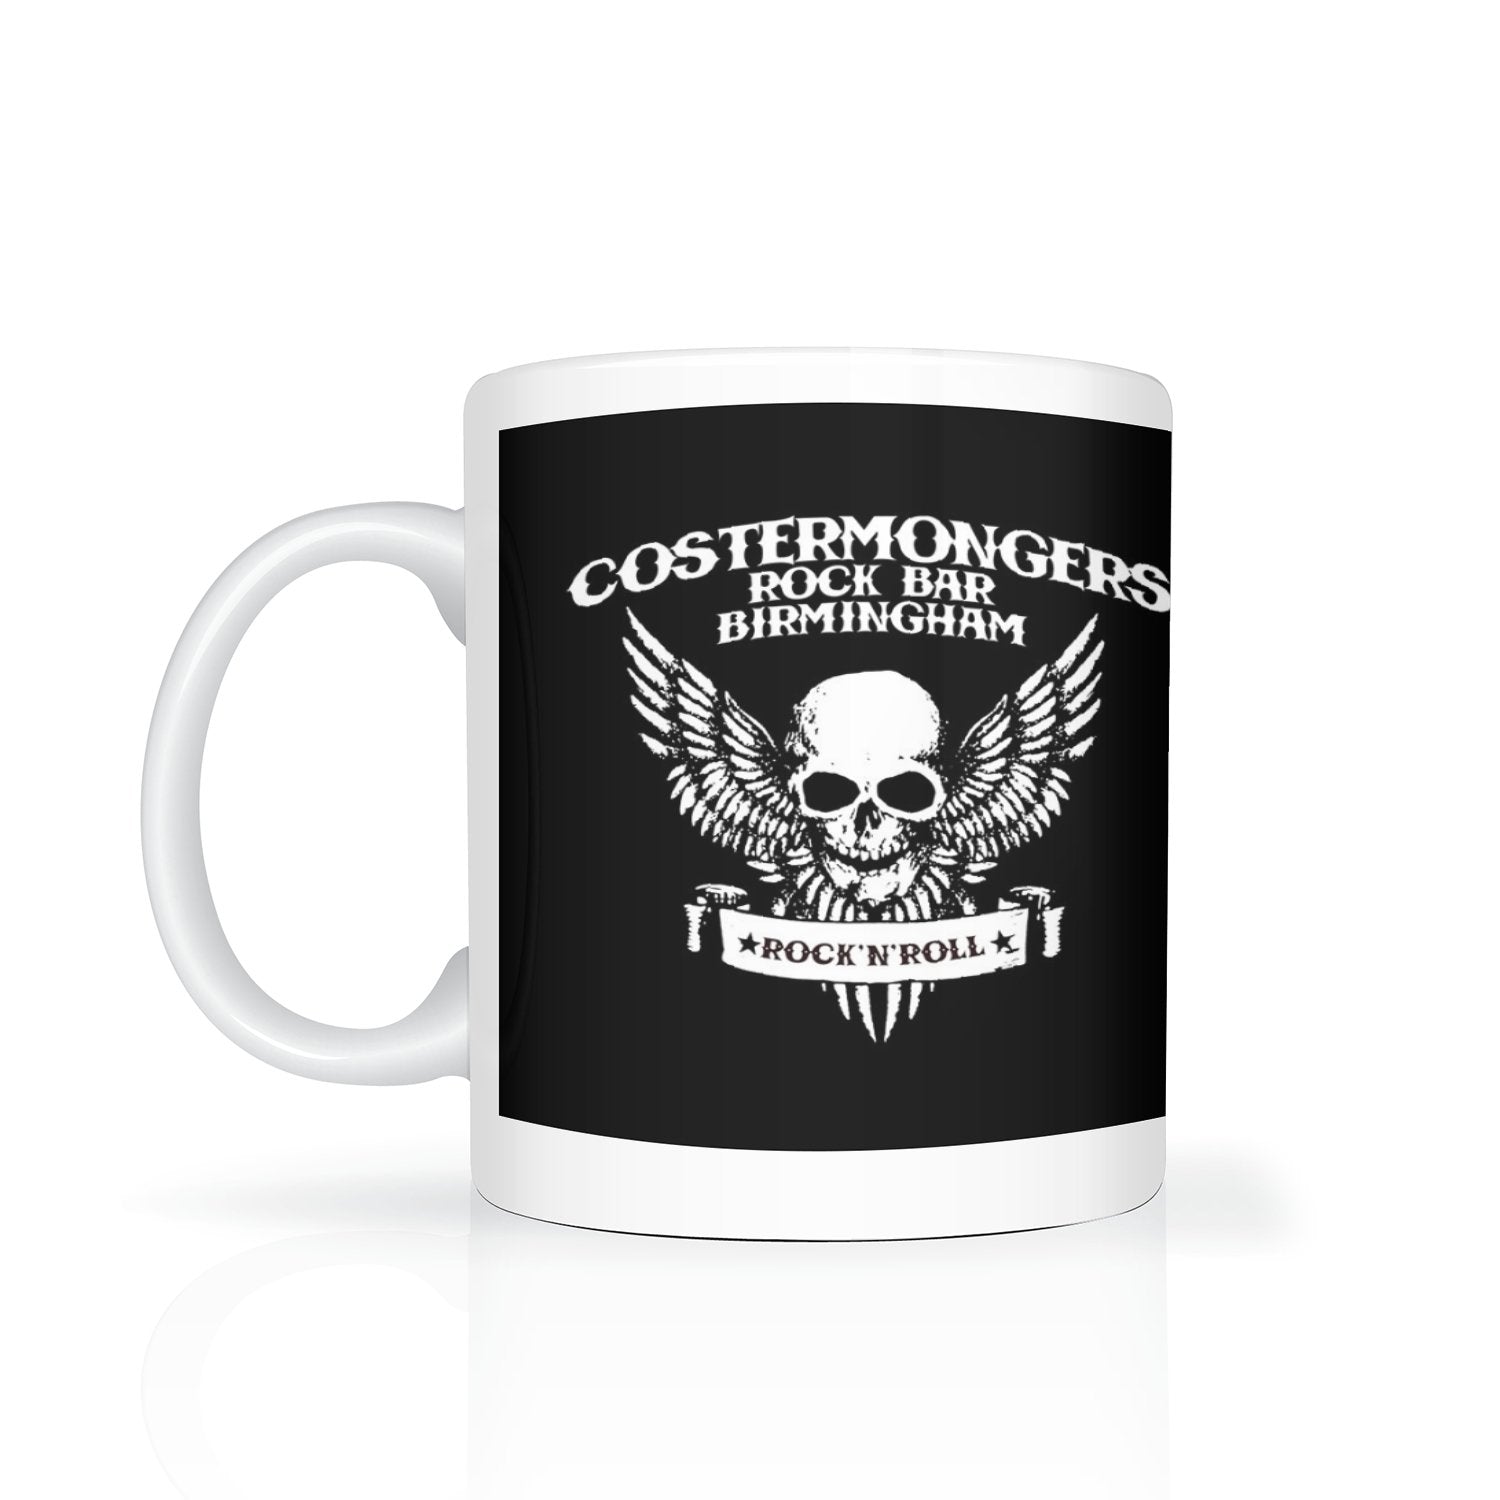 Costermongers mug - Dirty Stop Outs